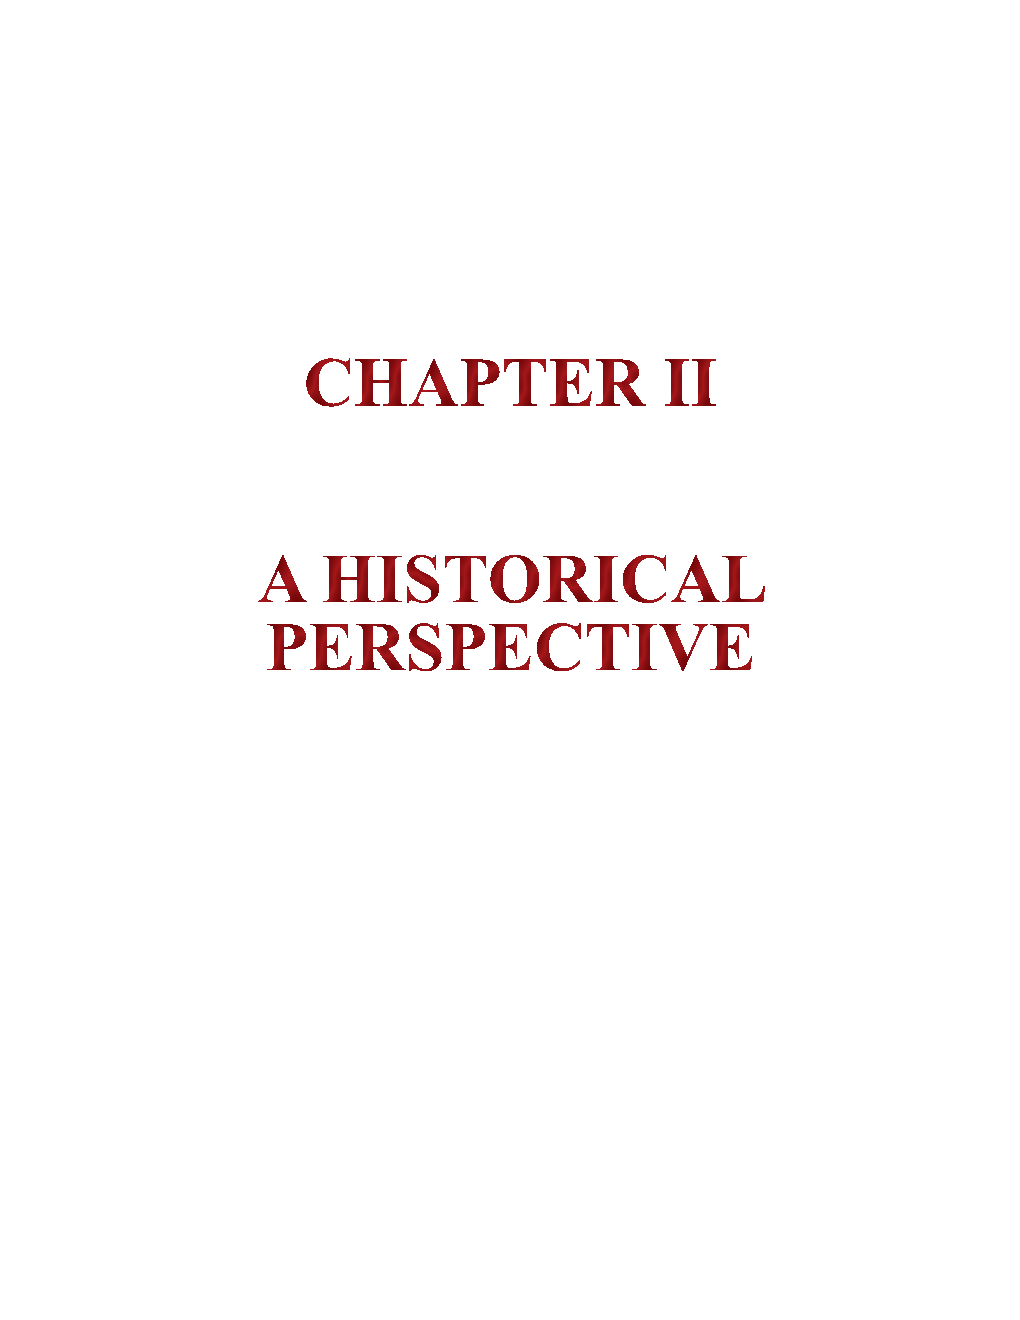 Historical Perspective.Pdf